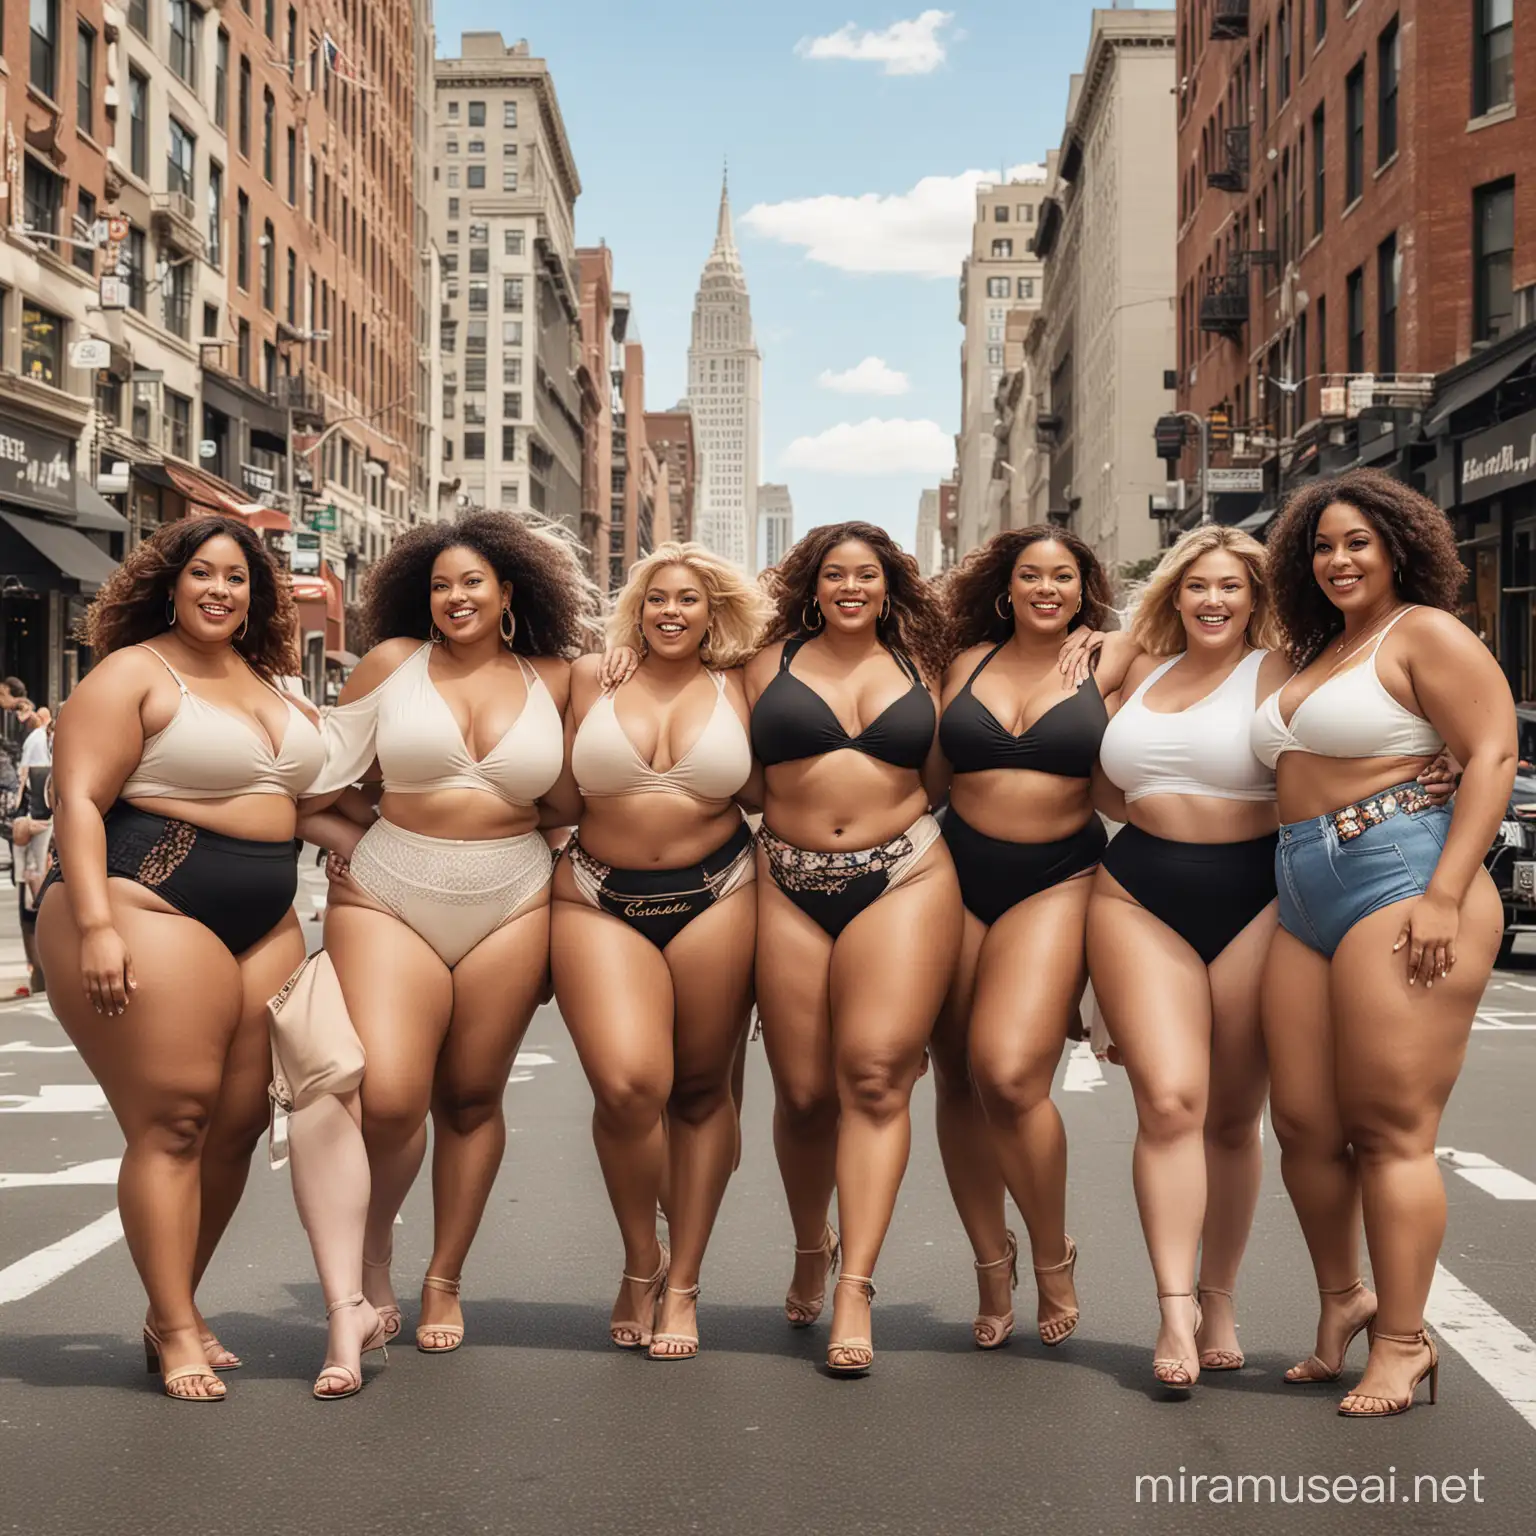 "Create a vibrant and empowering Facebook cover photo celebrating the beauty and diversity of plus-sized American women. Showcase a group of confident and stylish women of various ages, ethnicities, and body types, standing together with smiles on their faces, exuding confidence and positivity. Set against an iconic American backdrop, such as a city skyline or scenic landscape, the image should convey a message of inclusivity, empowerment, and body positivity. Incorporate the page name 'jCurvyChic USA' in an elegant and eye-catching font, complementing the overall theme of the image."






